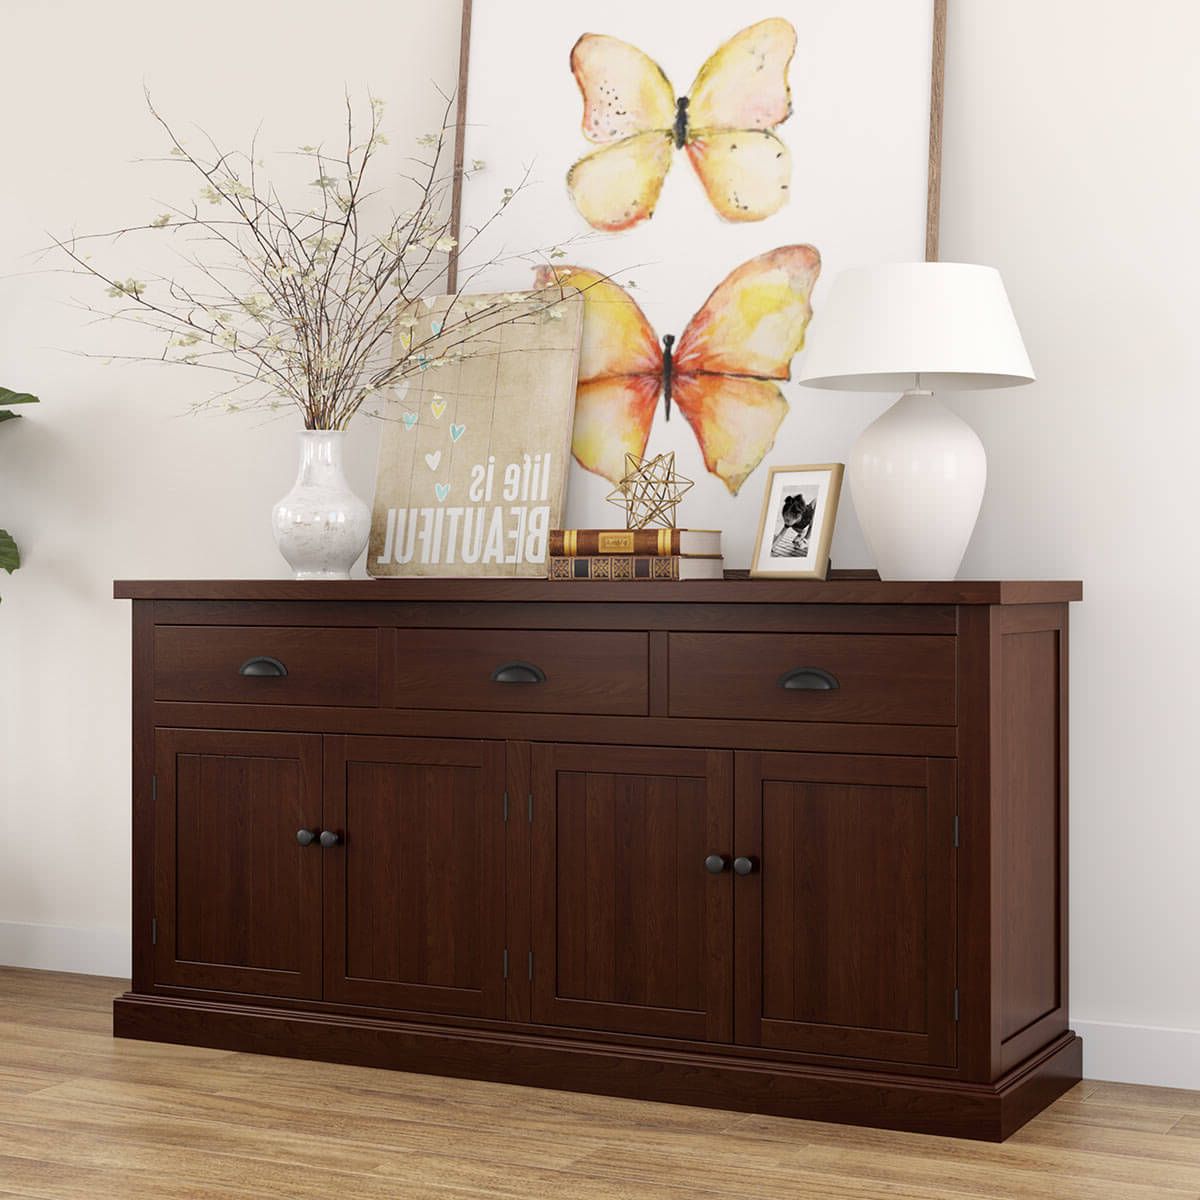 Tannersville Solid Mahogany Wood 3 Drawer Large Sideboard Cabinet Within Latest 3 Drawer Sideboards (View 10 of 10)